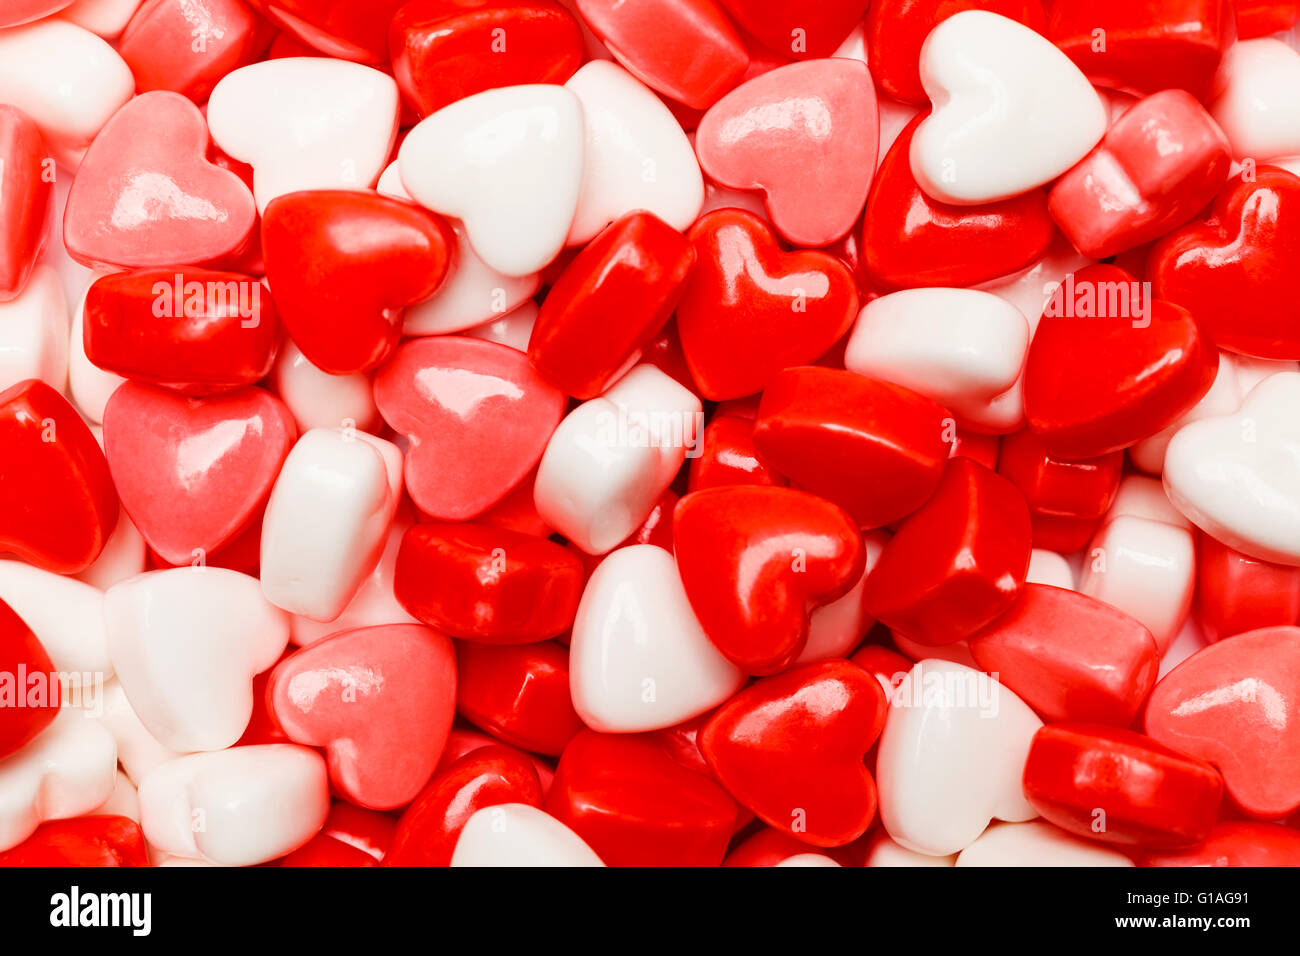 Pile of Pink and Red Candy Hearts. Stock Photo